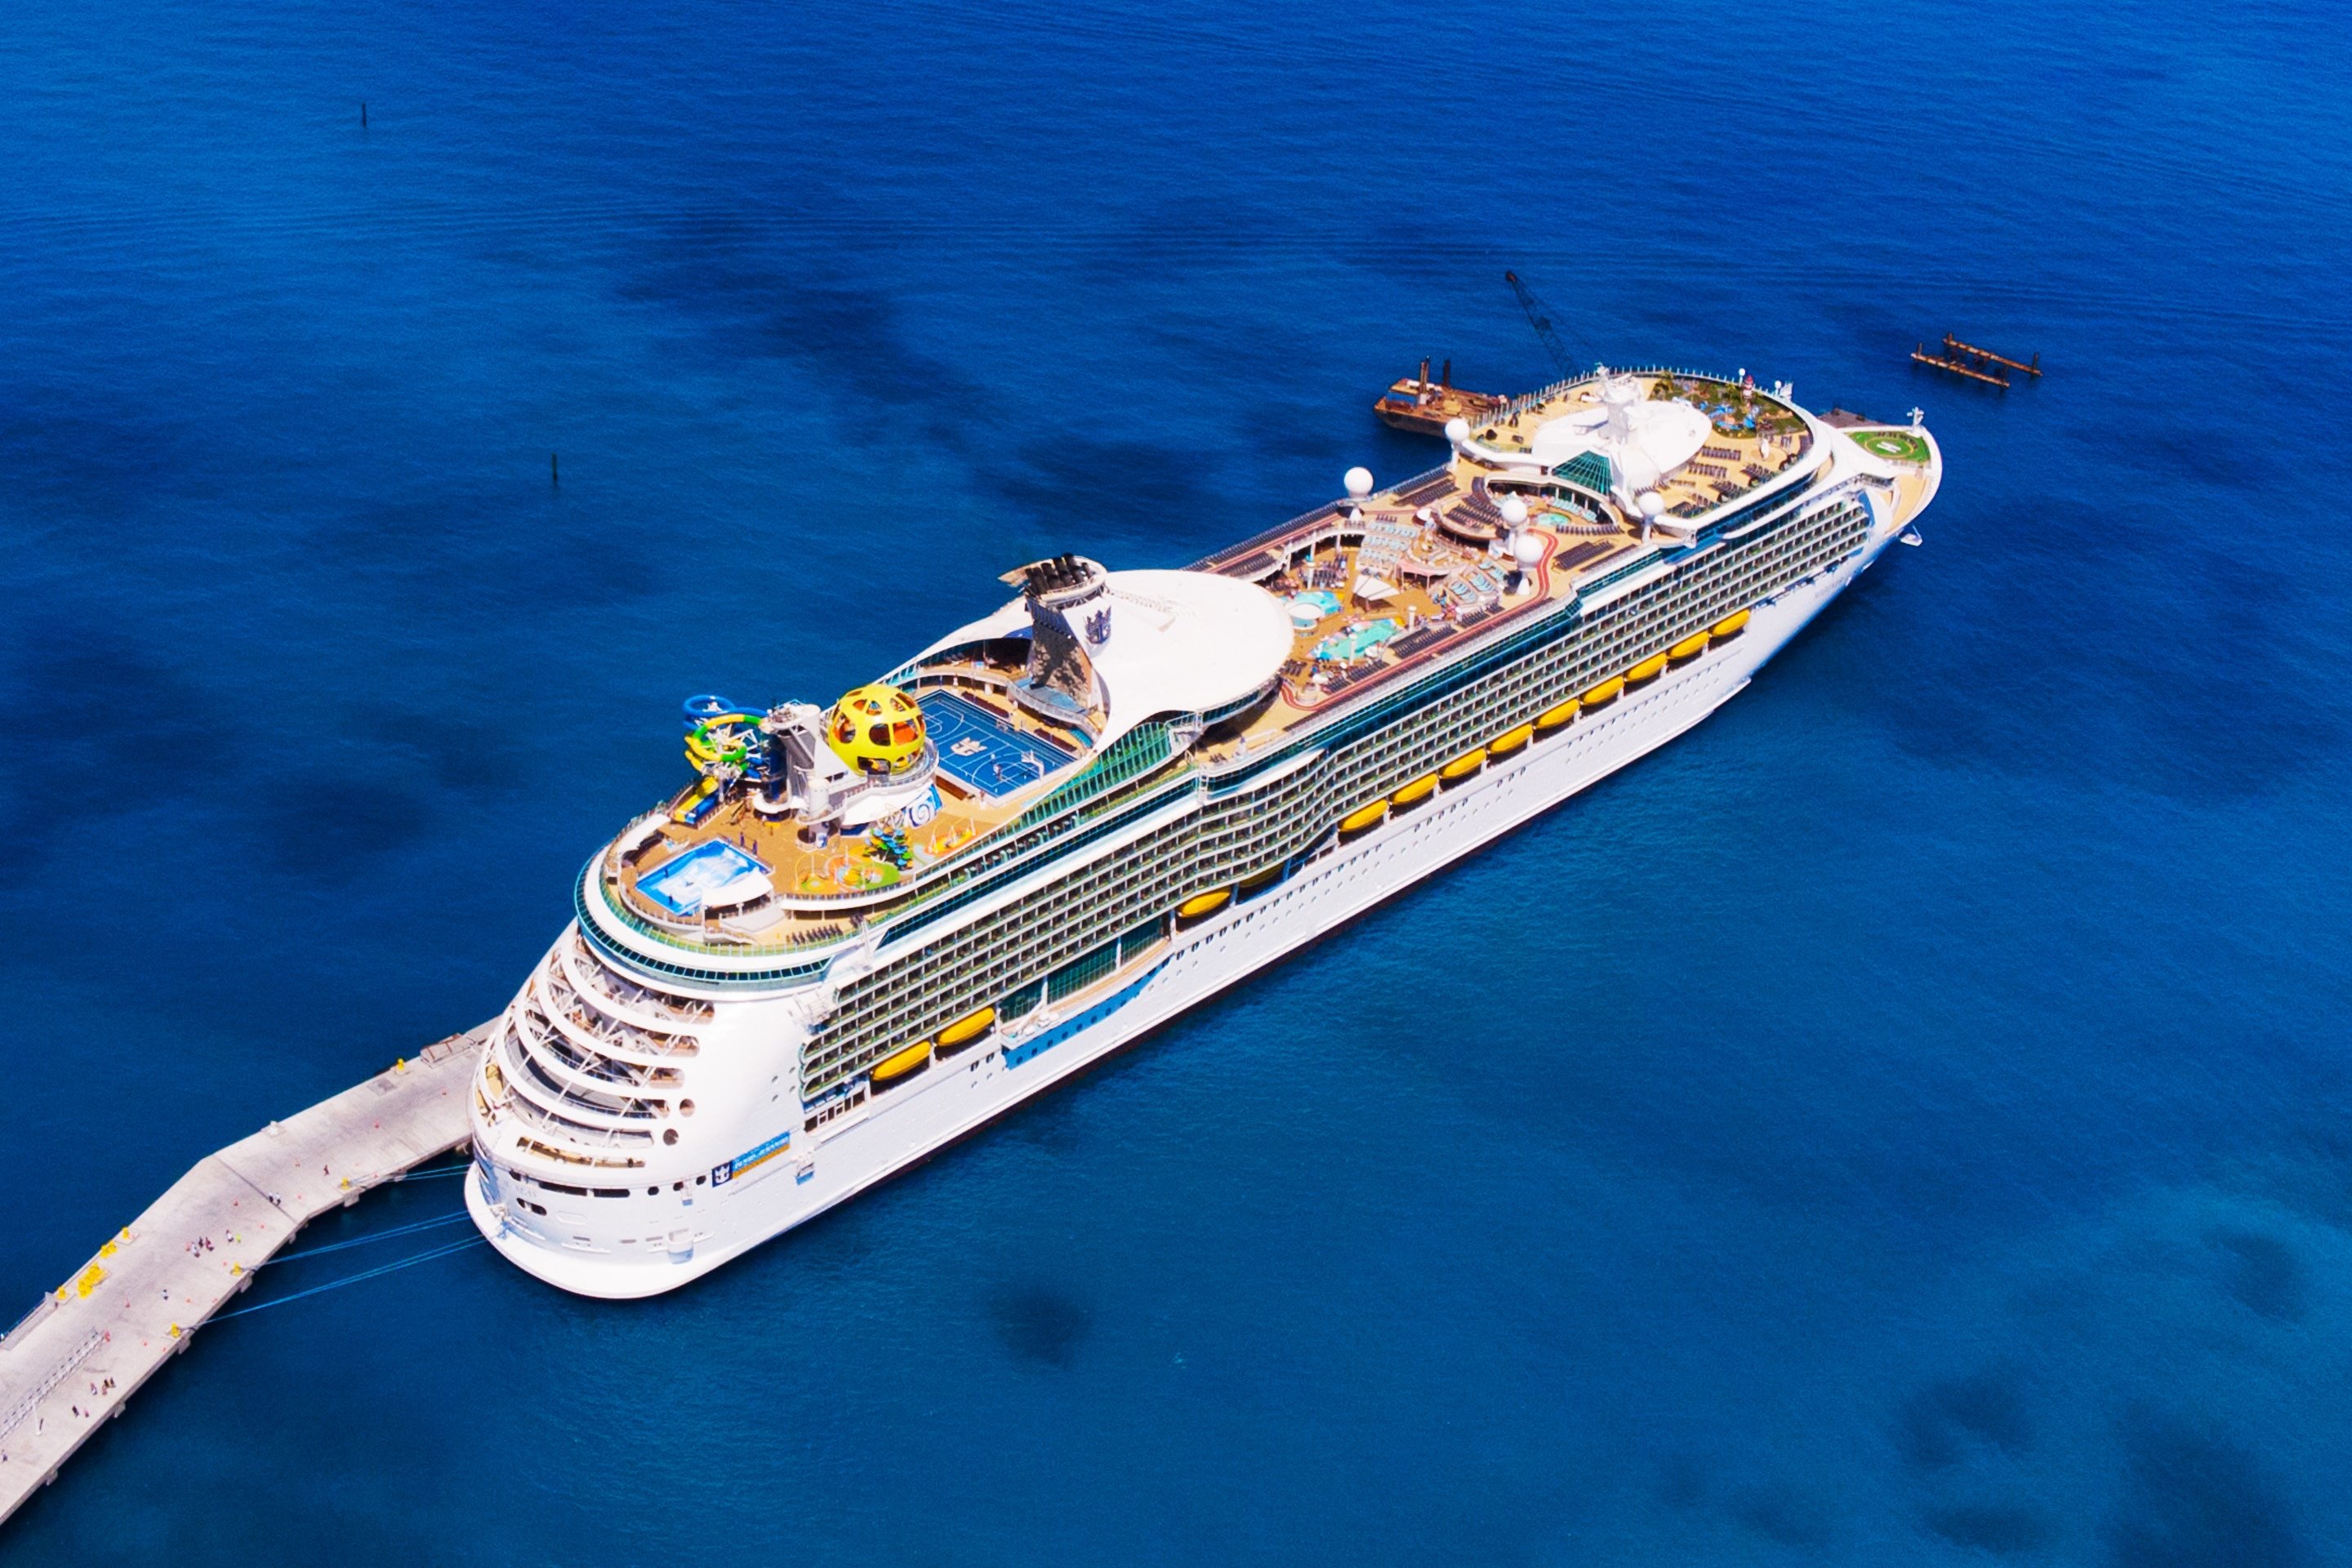 6 really interesting facts about Royal Caribbean's new cruise safety